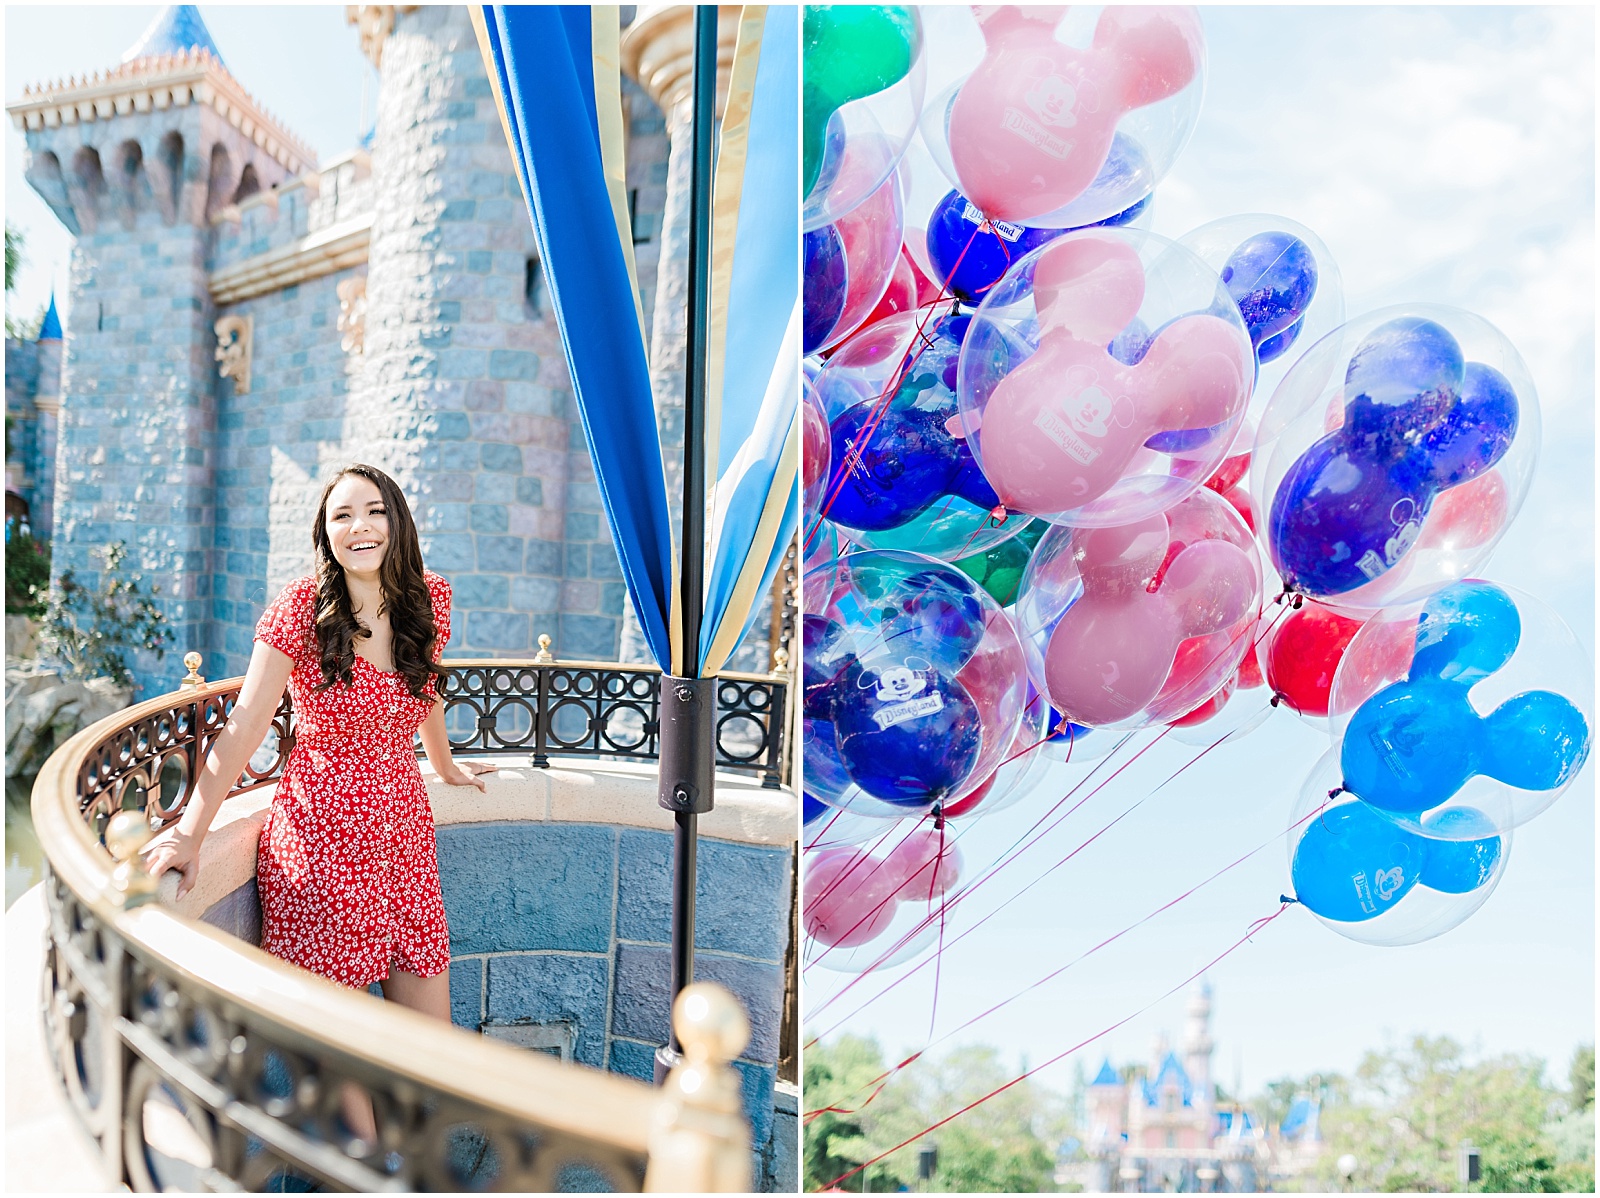 Disneyland Castle Senior Session.  Images by Mollie Jane Photography. To see more go to www.molliejanephotography.com.